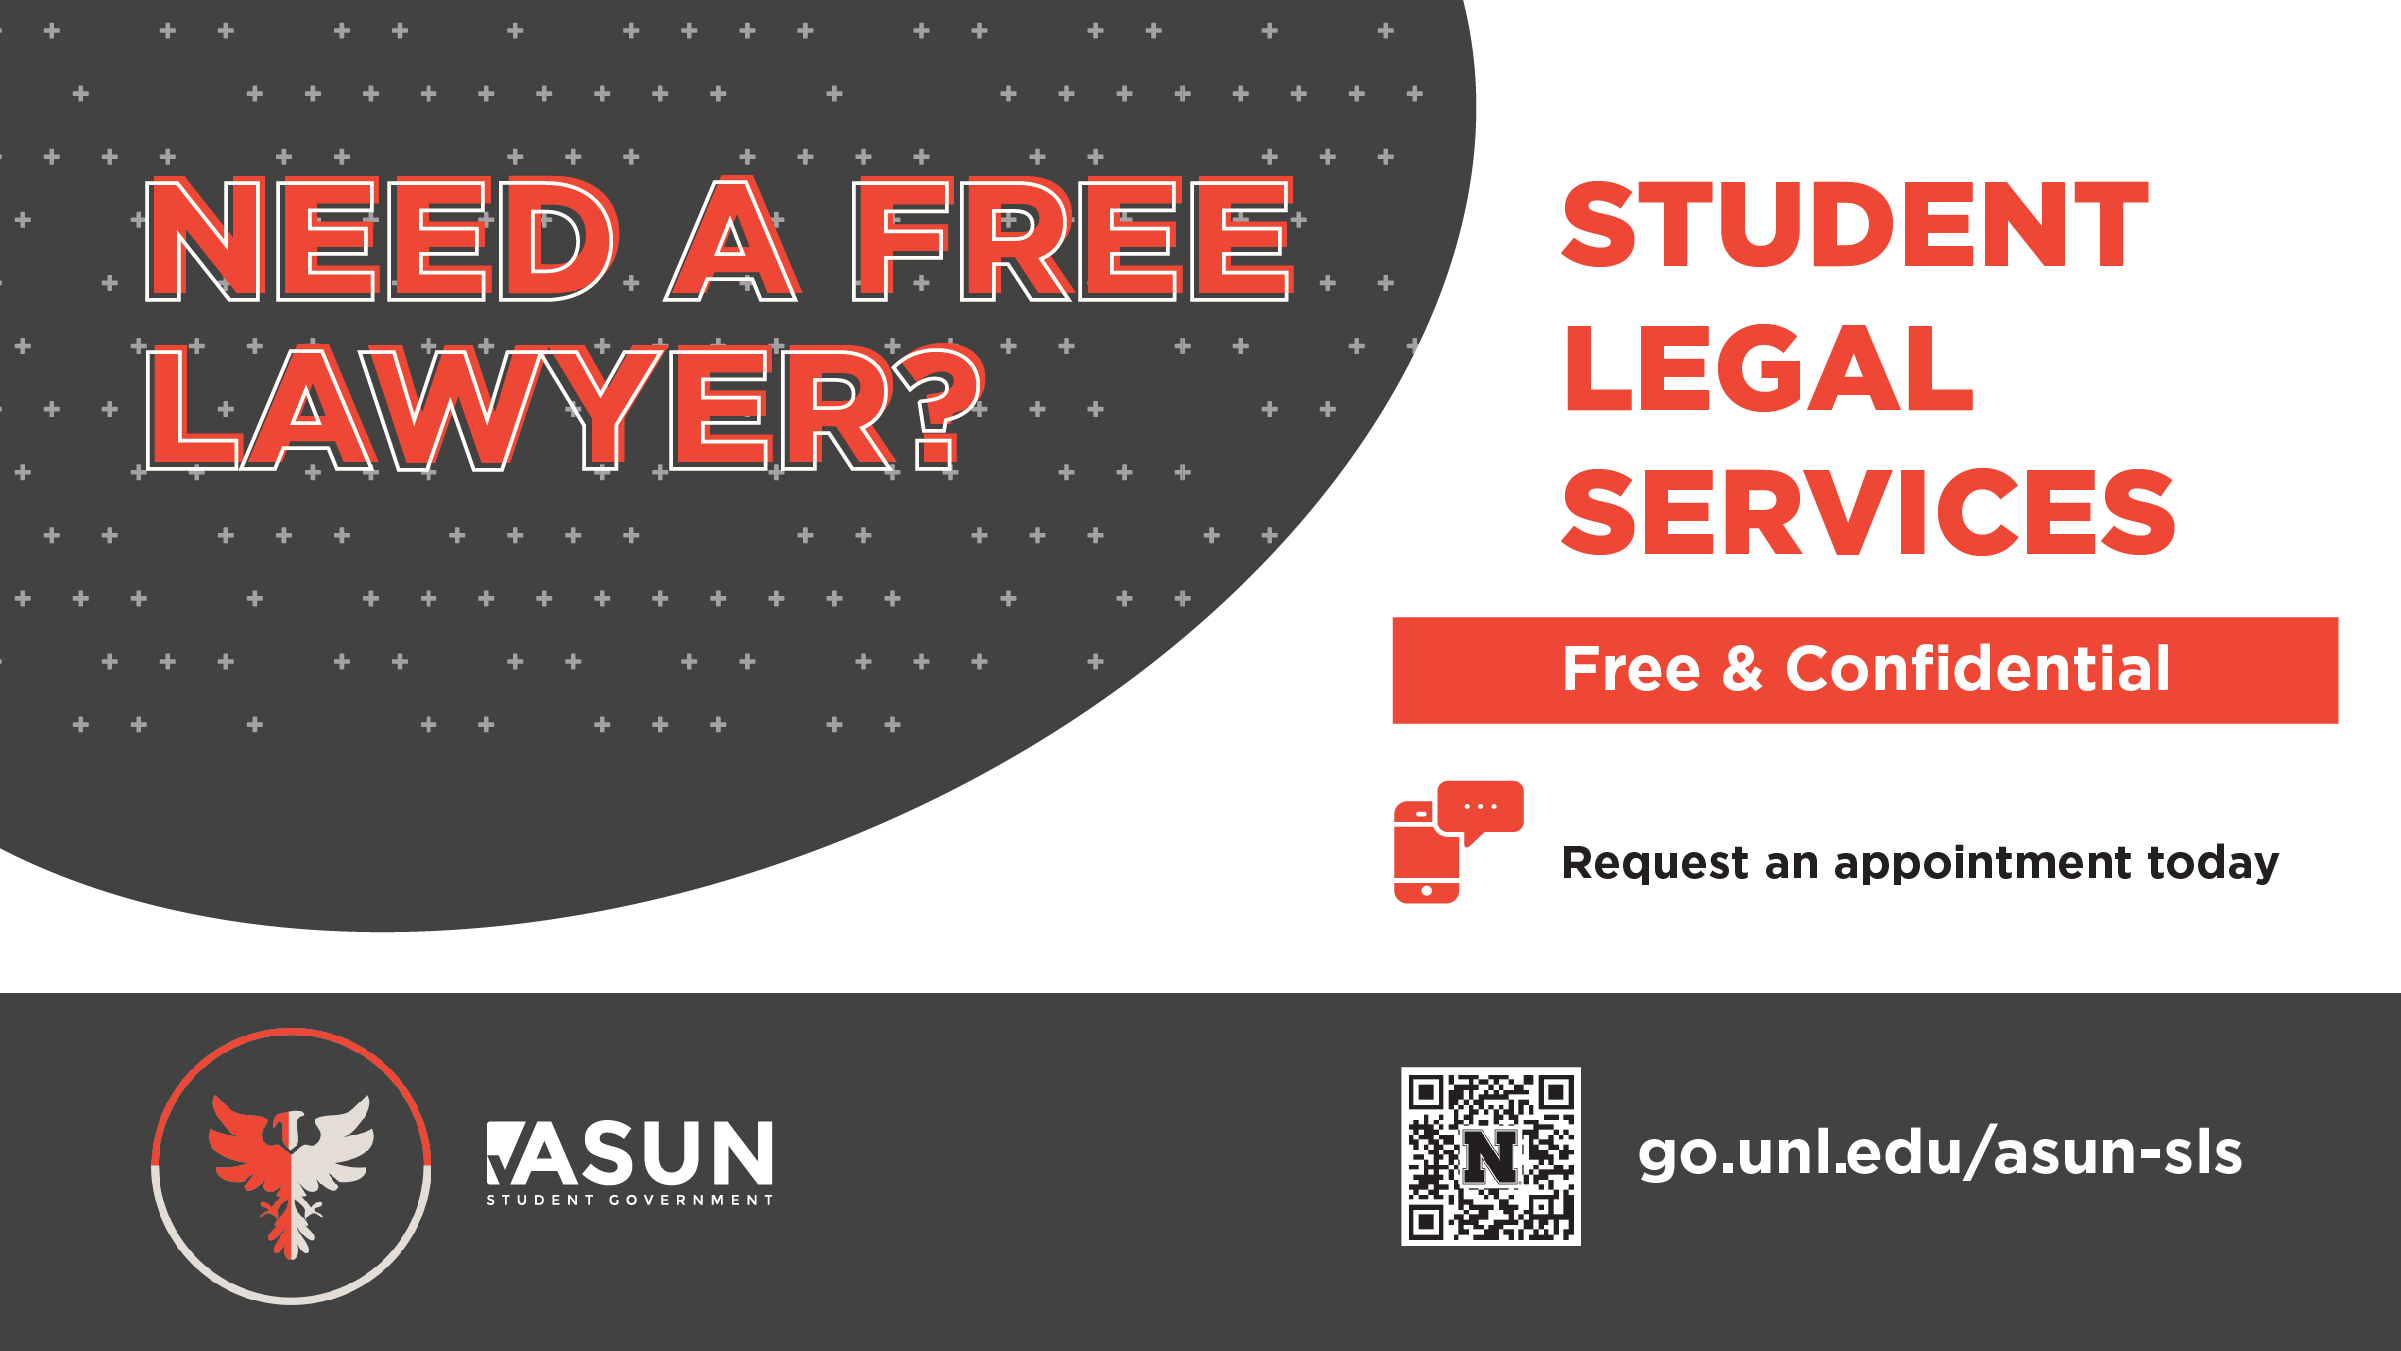 student legal services